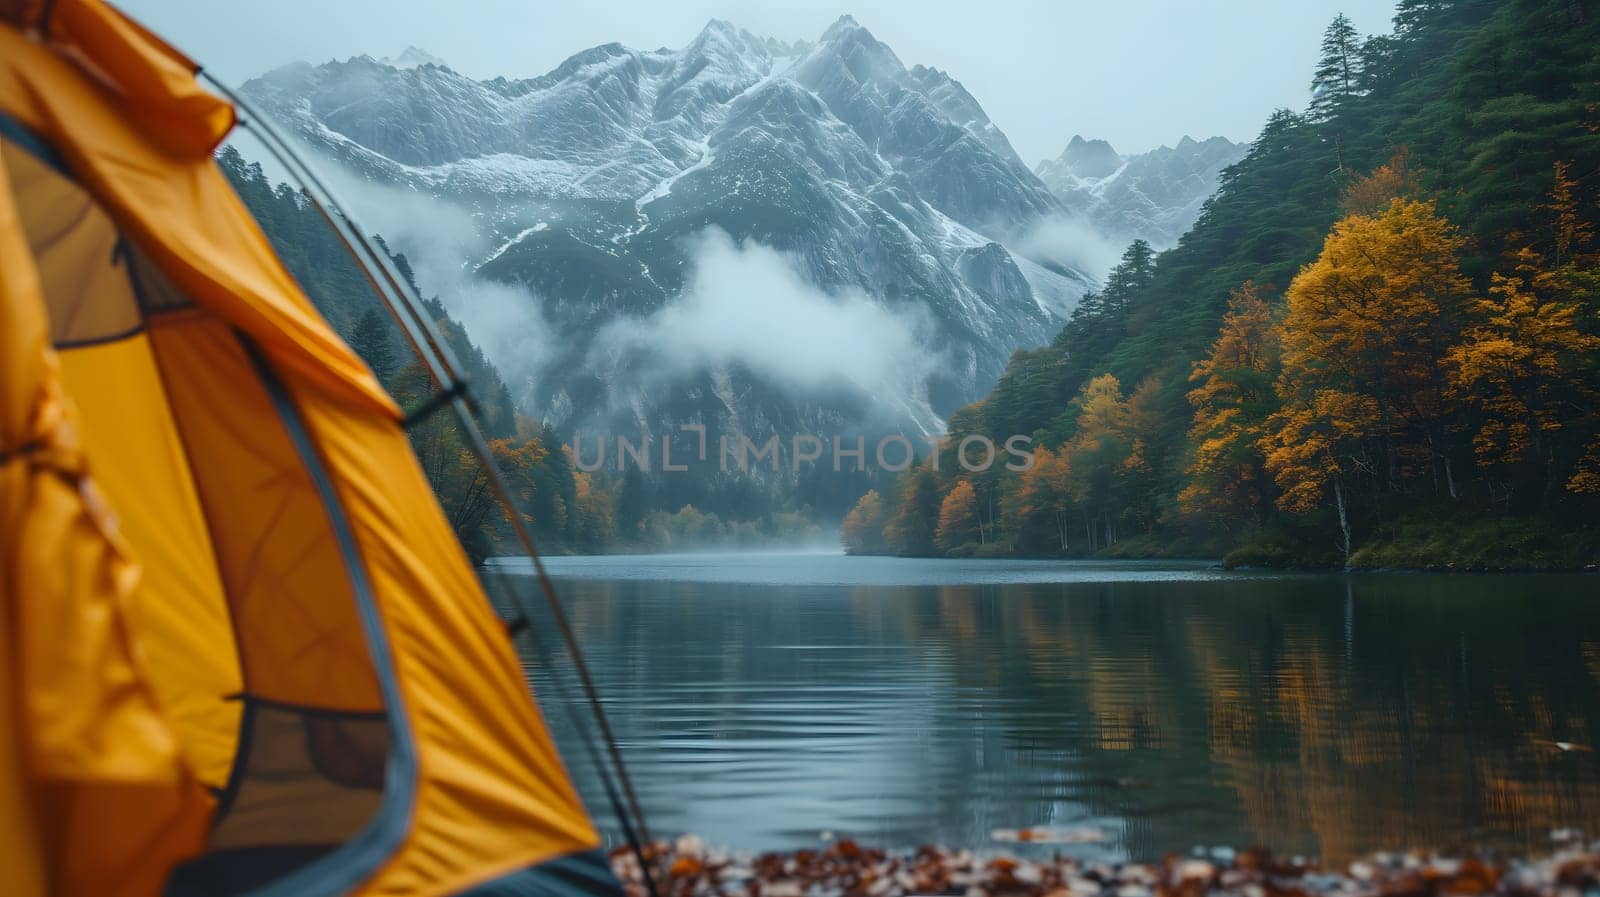 Close-up of a tent in the foreground and mountains with fog in the background with a lake or river in the foreground. by z1b